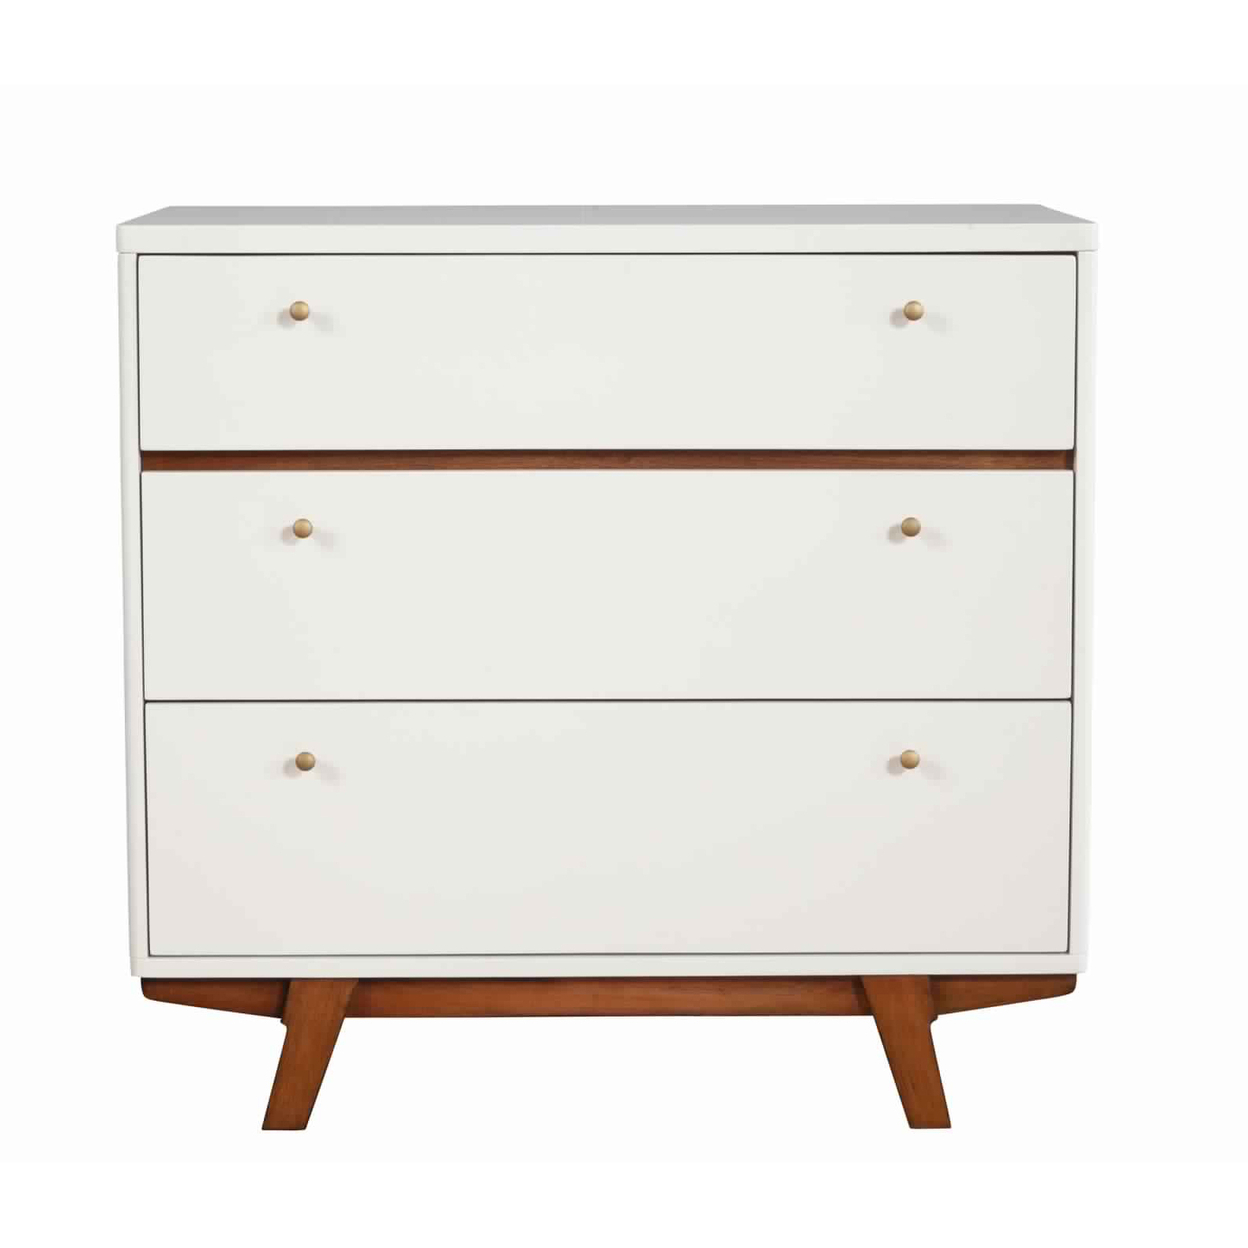 3 Drawer Wood Chest With Round Pulls And Angled Legs, Small,White And Brown- Saltoro Sherpi